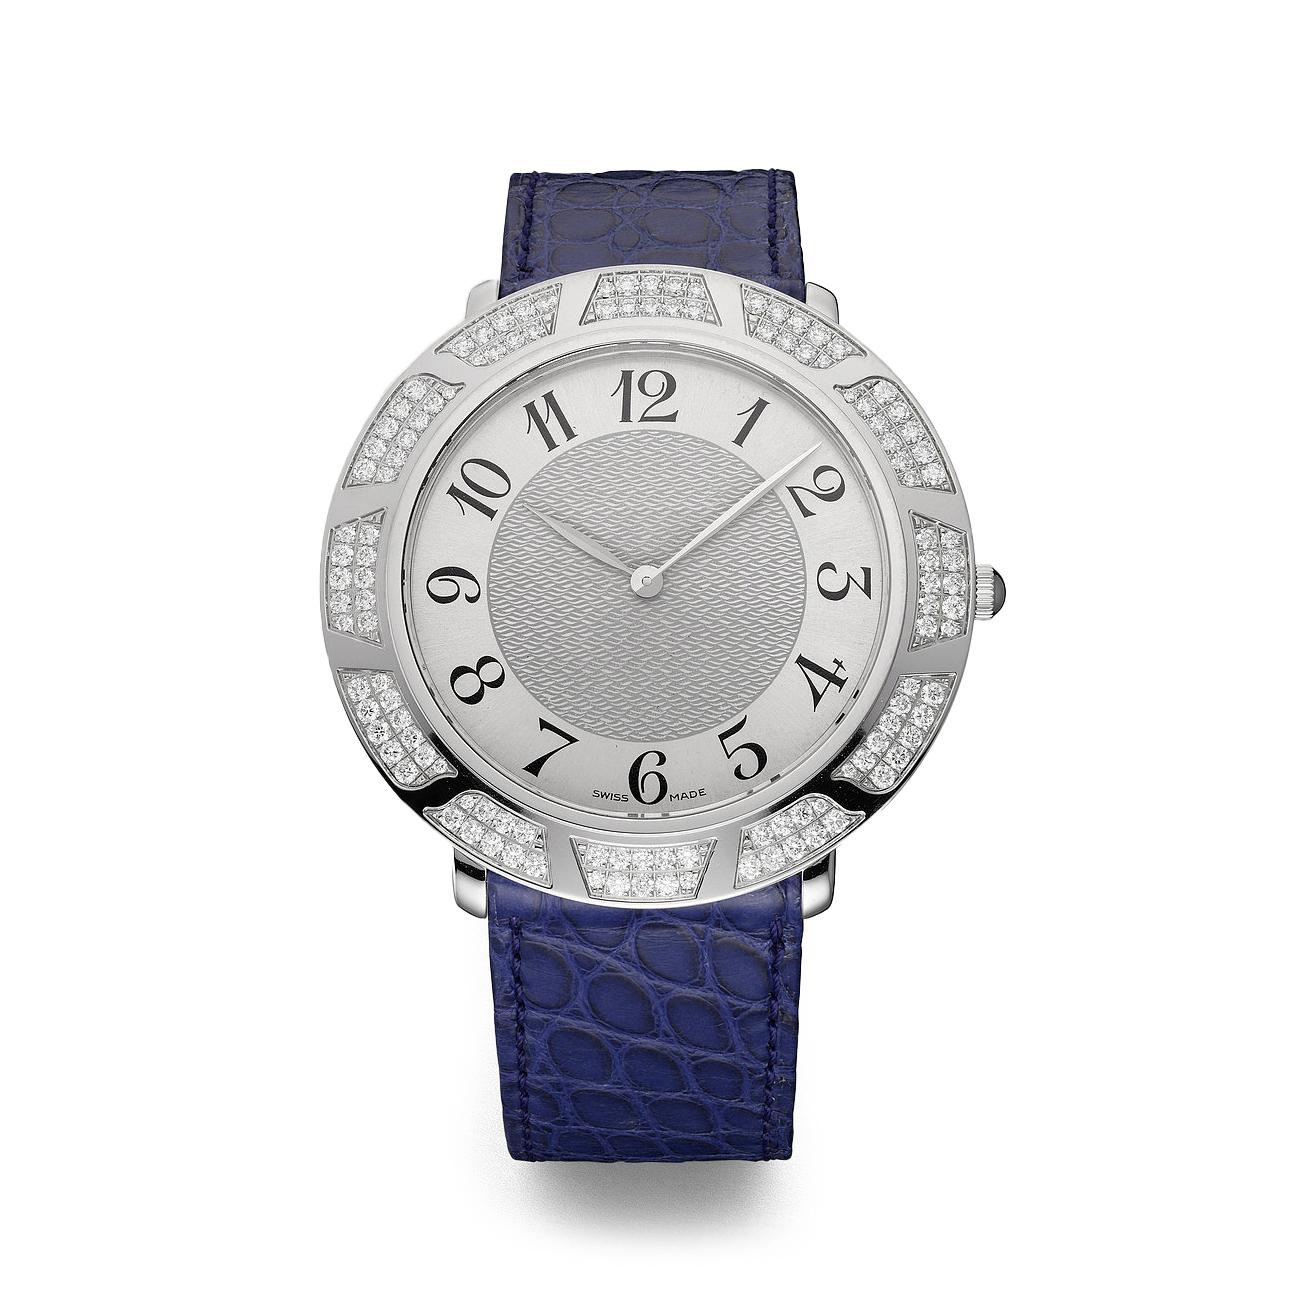 Watch in steel, silver dial, bezel set with 120 diamonds 1.78 cts with prong buckle alligator strap quartz movement.         

We do not guarantee the functioning of this watch.